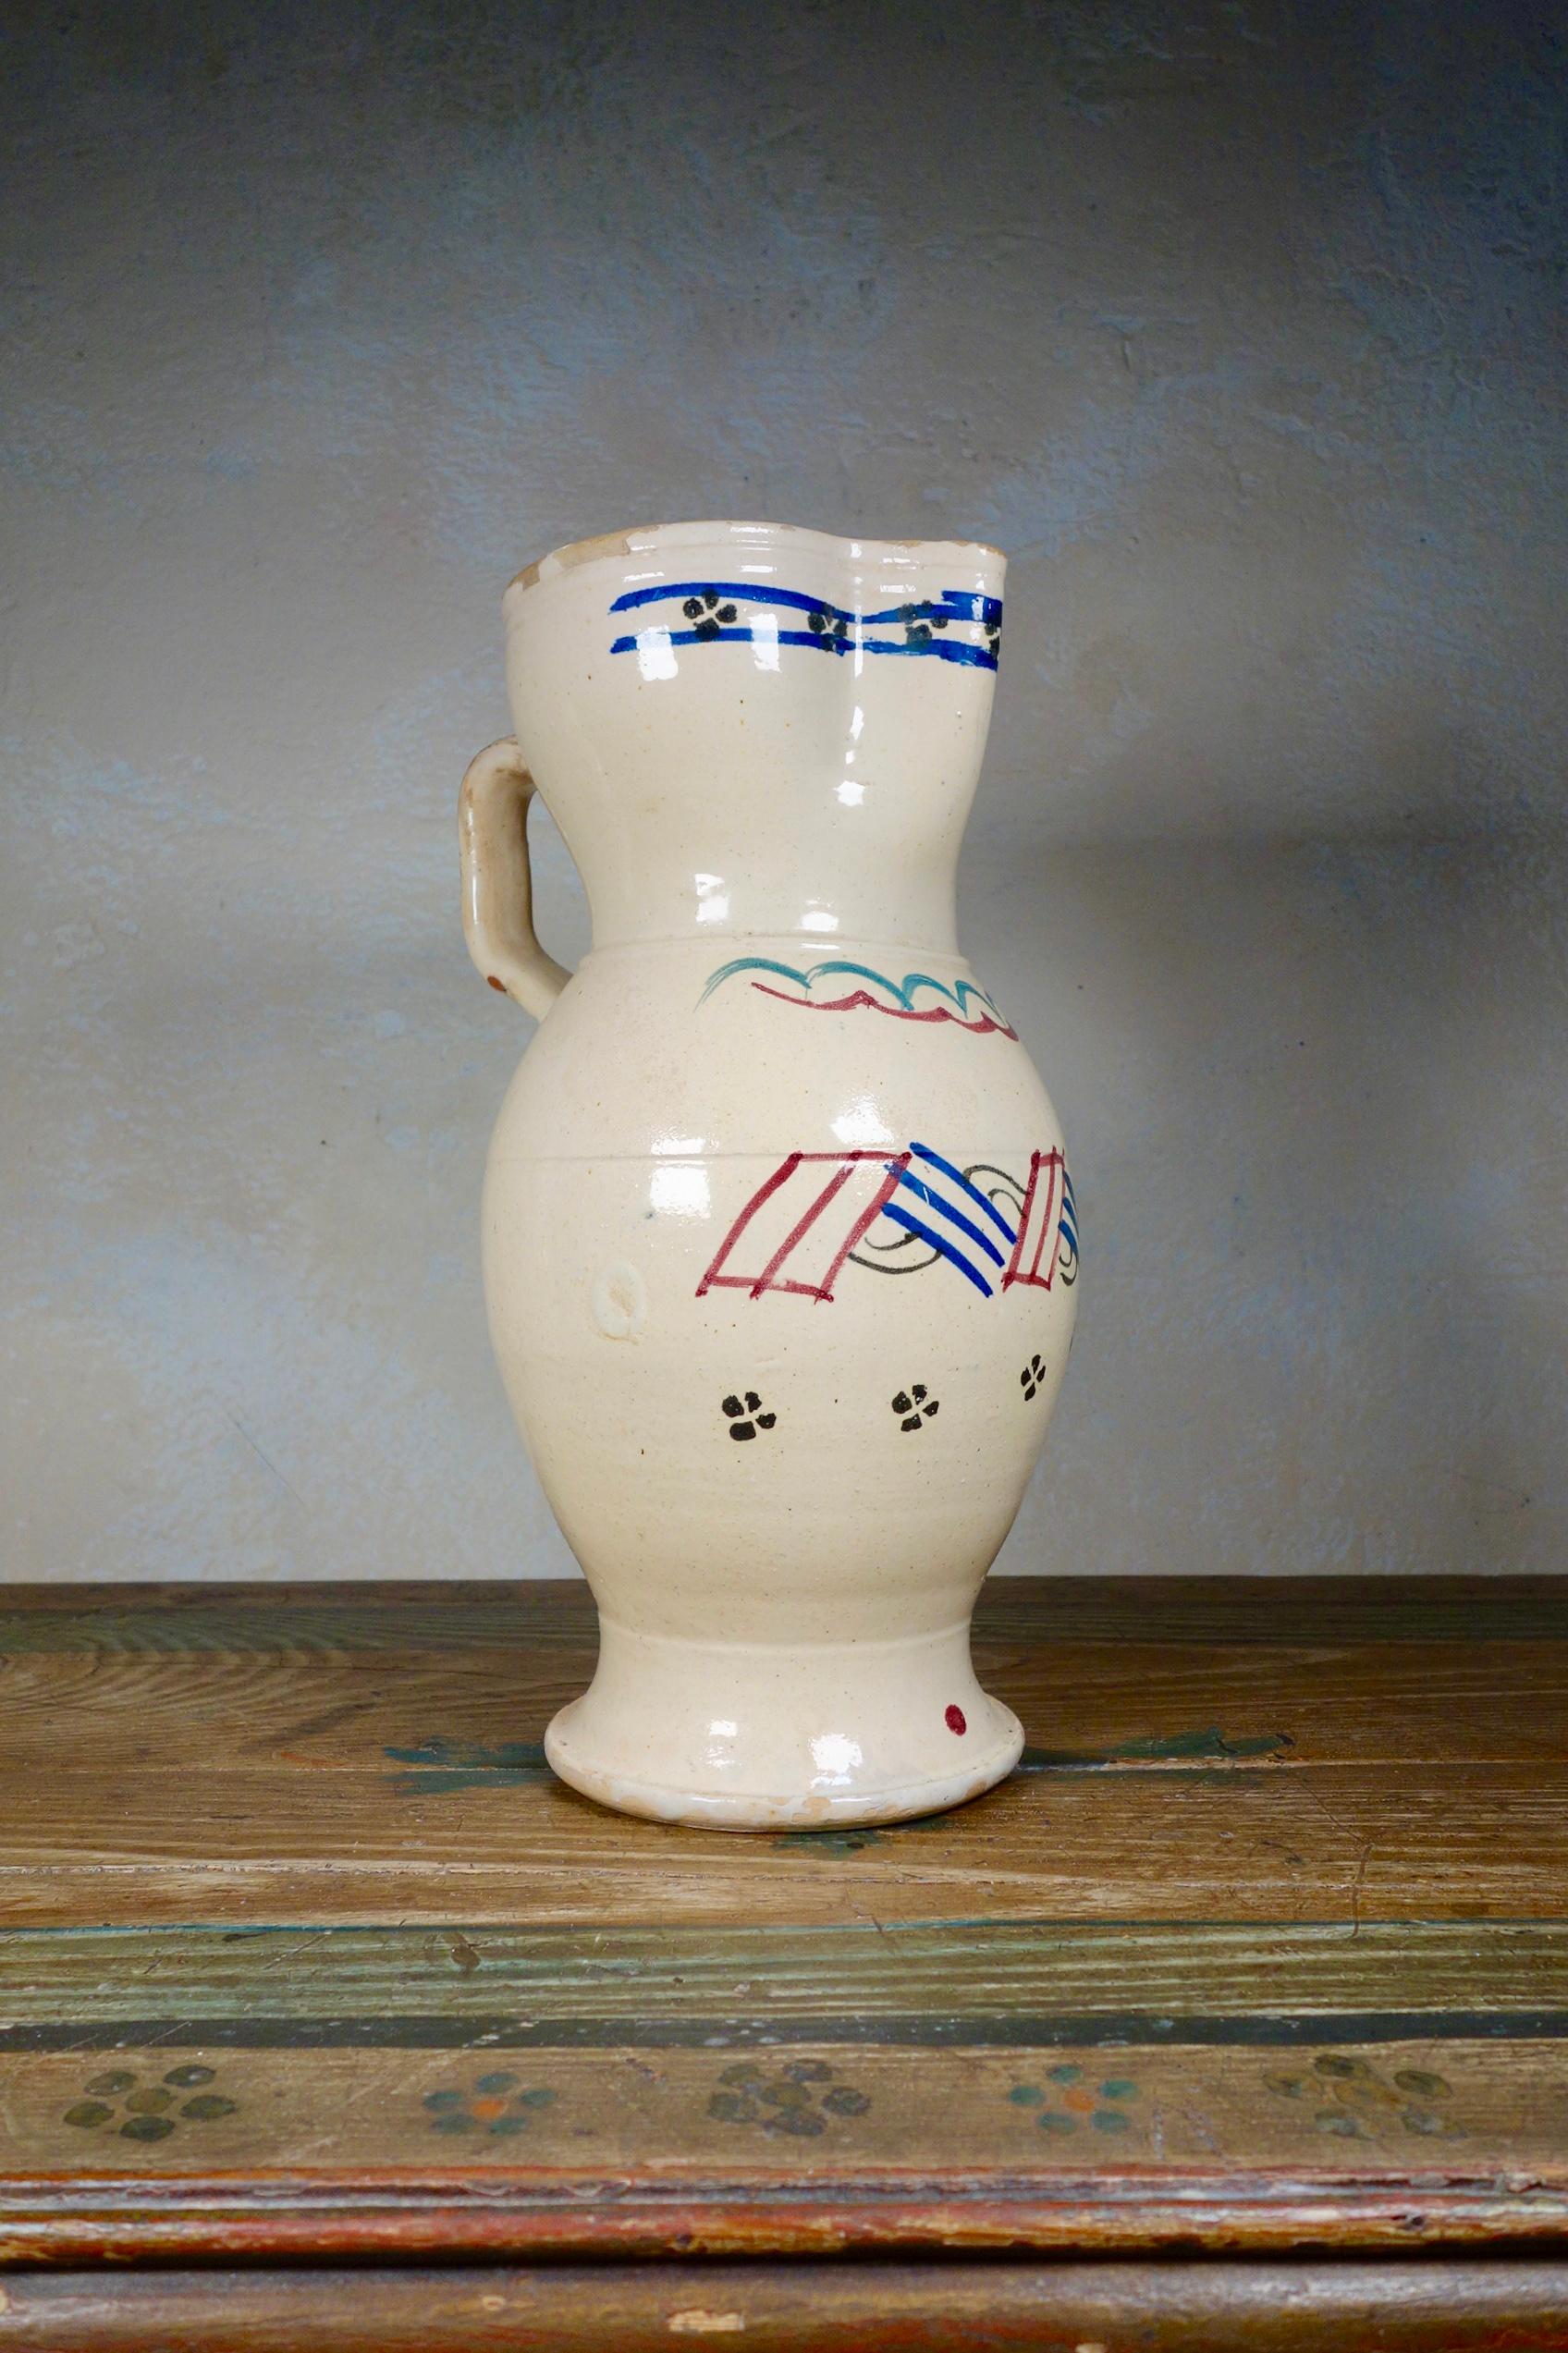 A large 19th century tin-glaze Pugliese Pitcher.
Featuring an elongated ovoid-shape body with a disc foot. The flat strap handle rises from just under the rim and ends just before the widest part of the lower body.
Painted with simple geometric